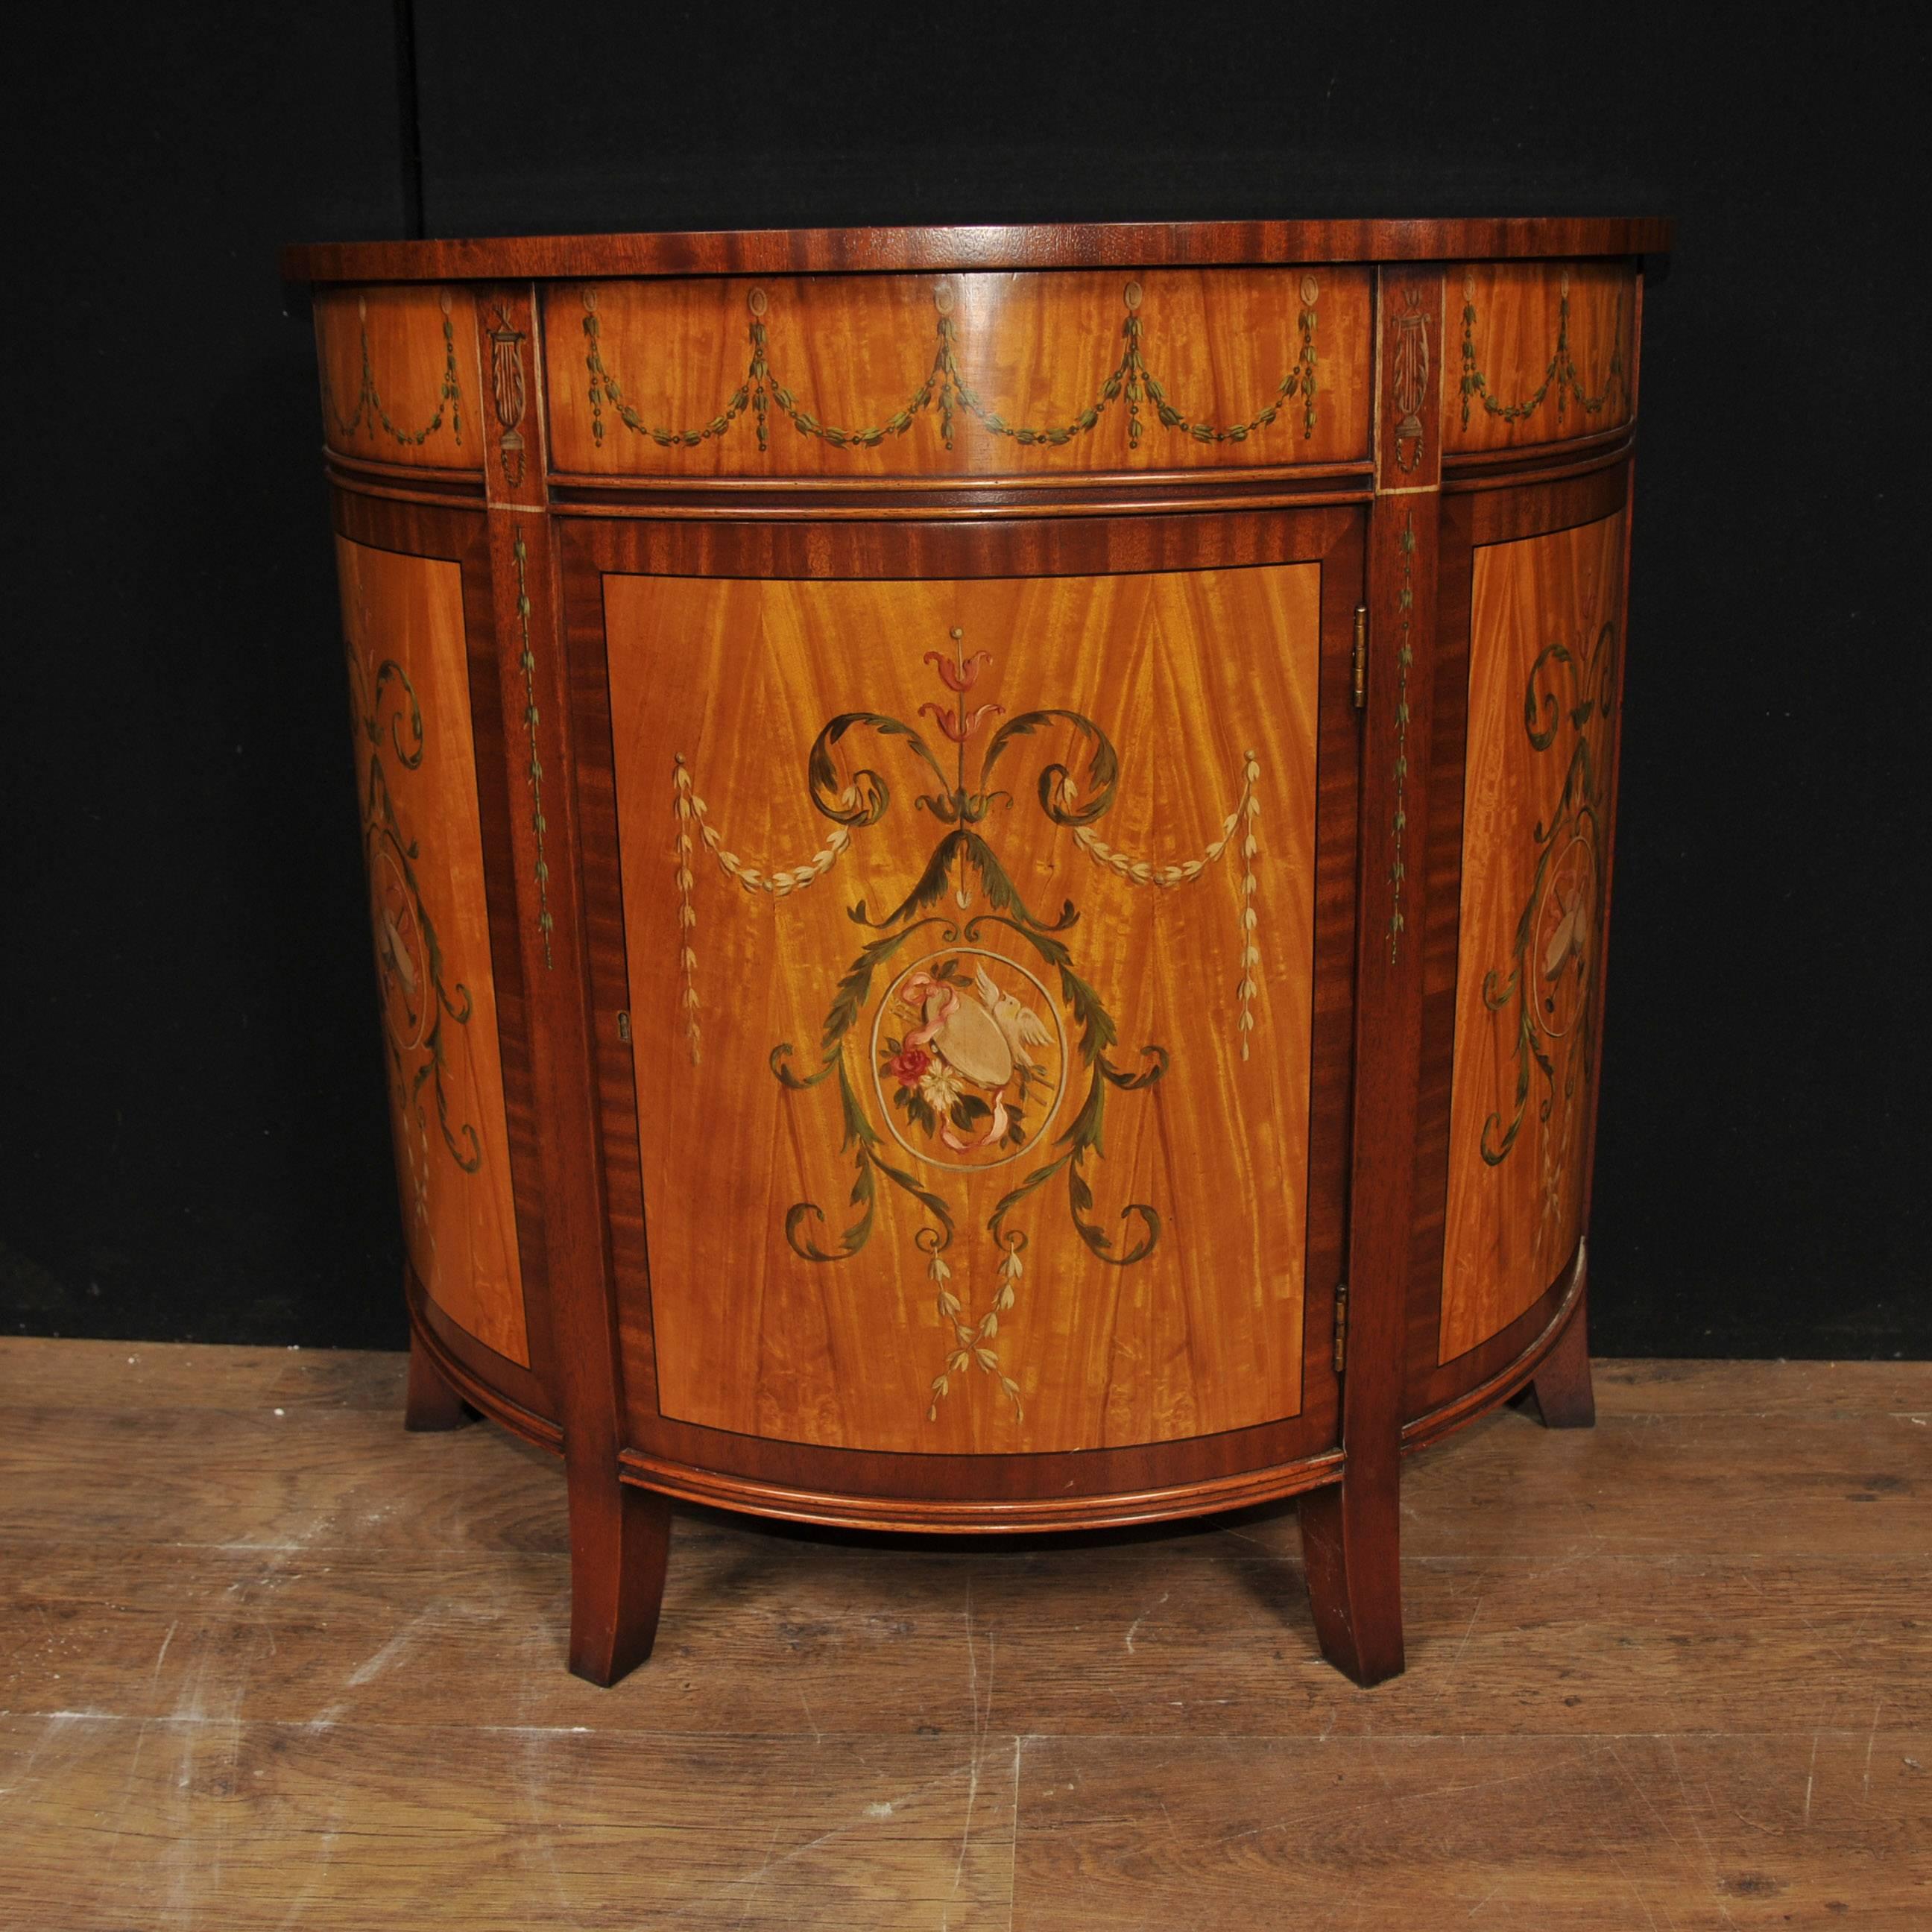 Gorgeous single Regency style painted cabinet in satinwood with rosewood banding.
High end luxury piece of quality cabinet of demi lune (half moon) form.
Love the hand painted designs including sashes, floral motifs and other Sheraton